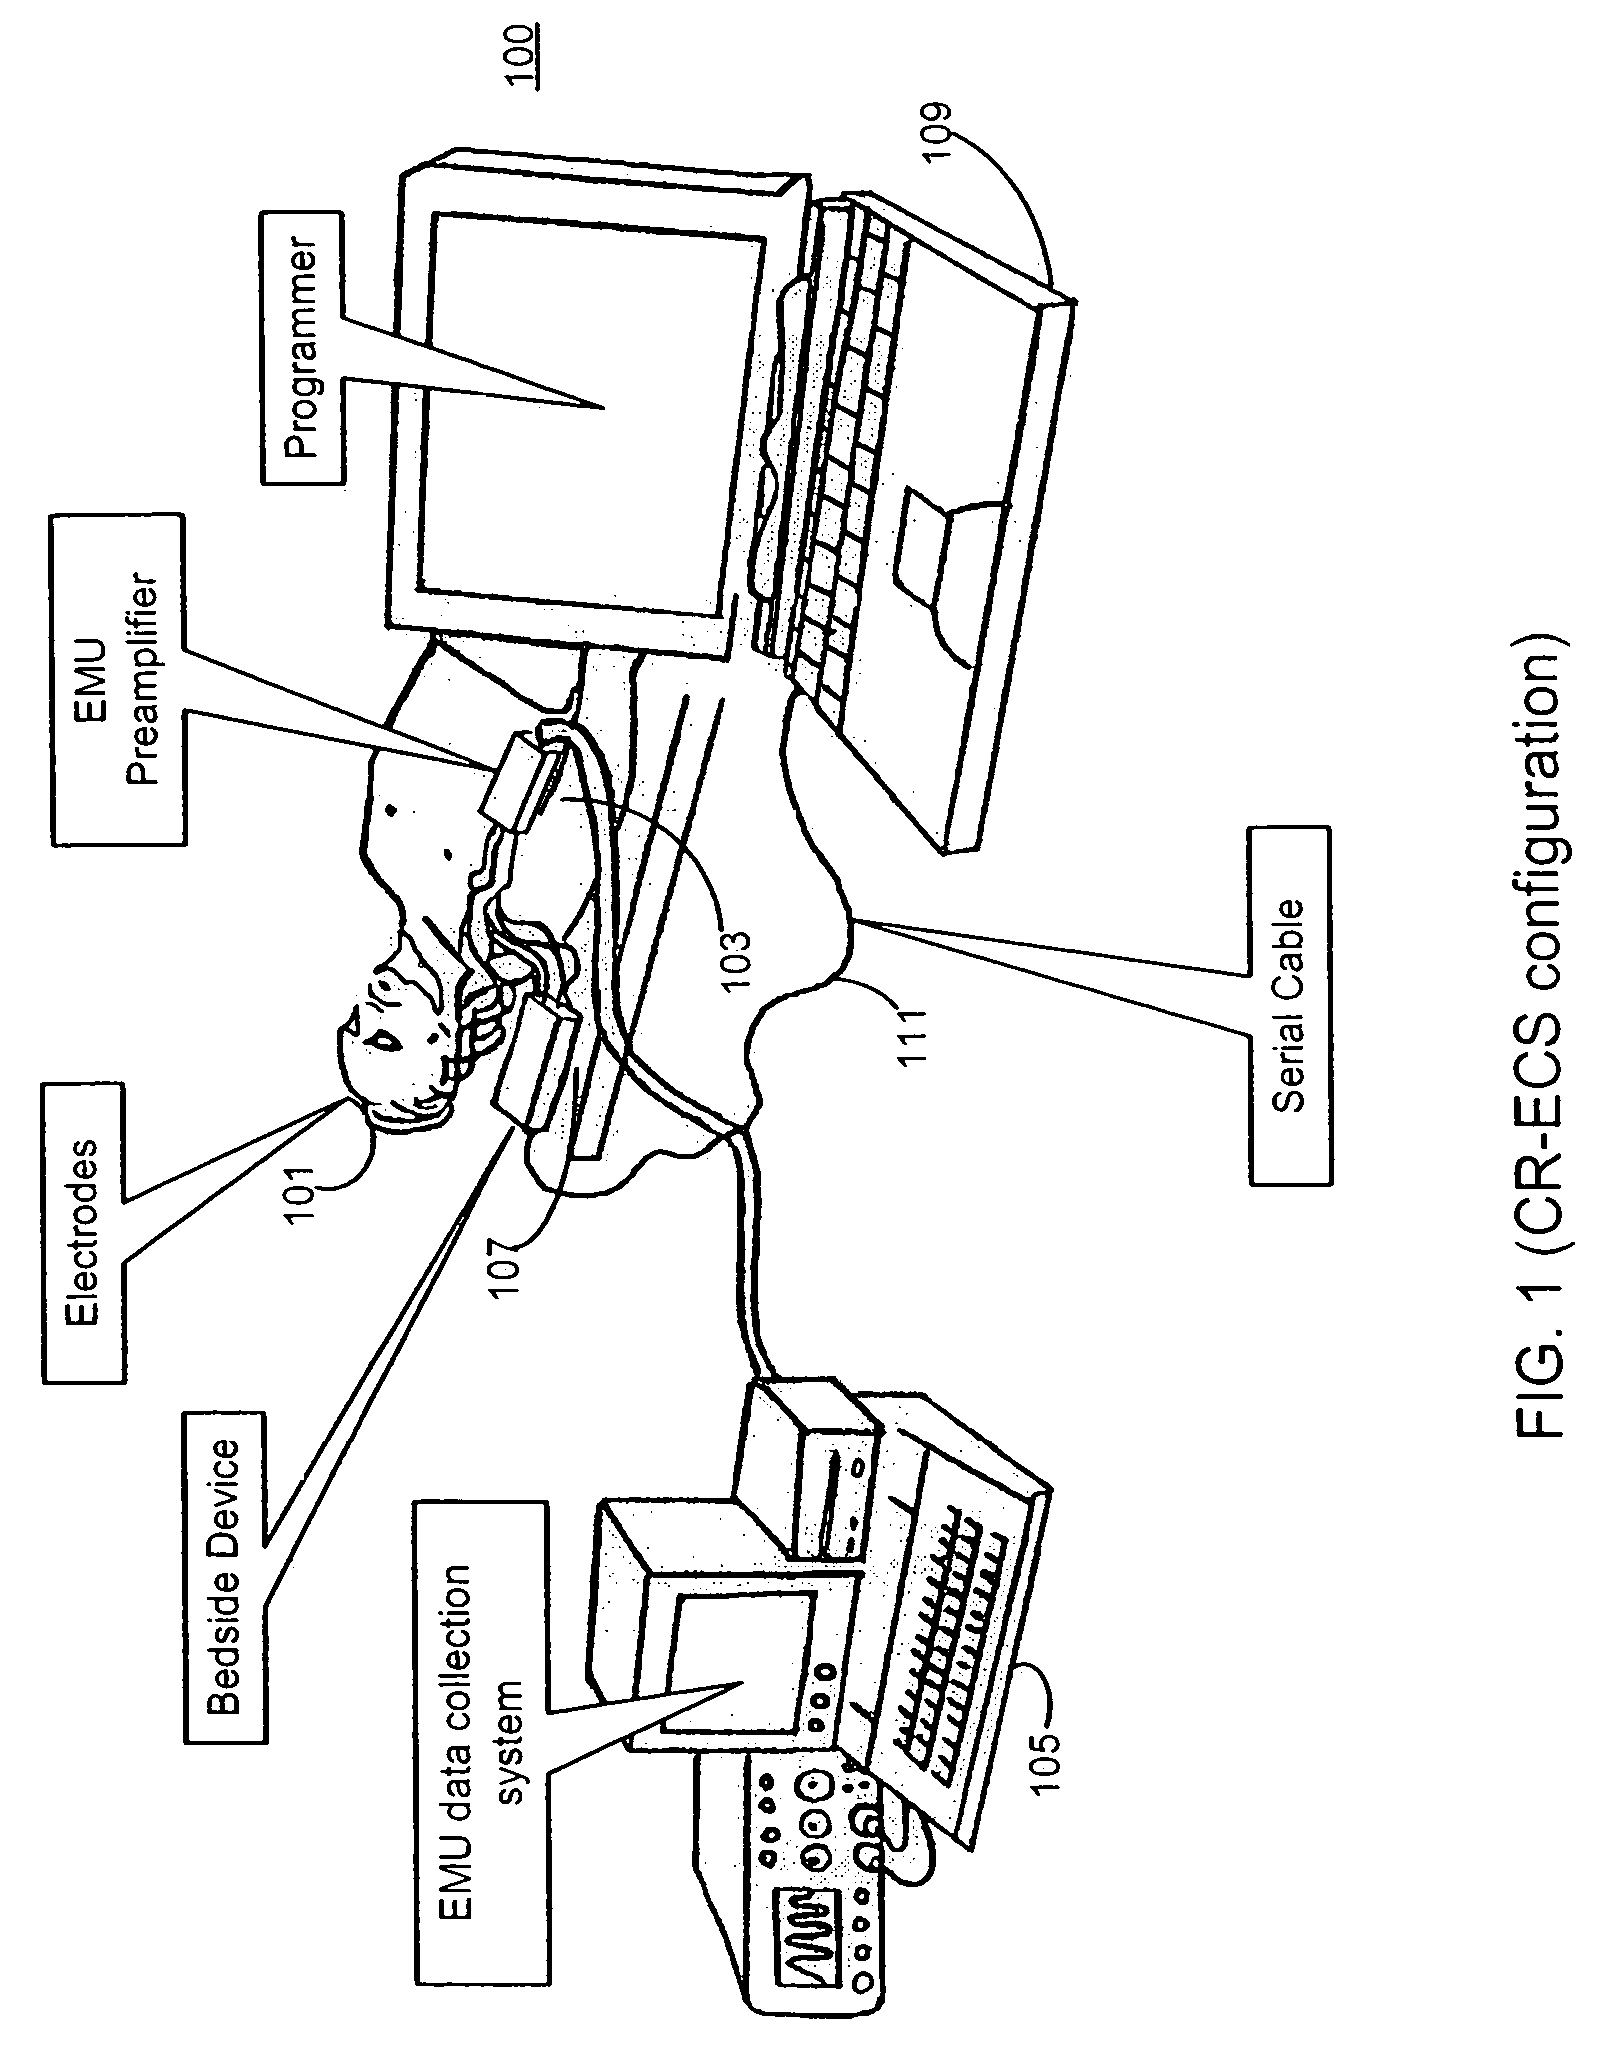 Channel-selective blanking for a medical device system